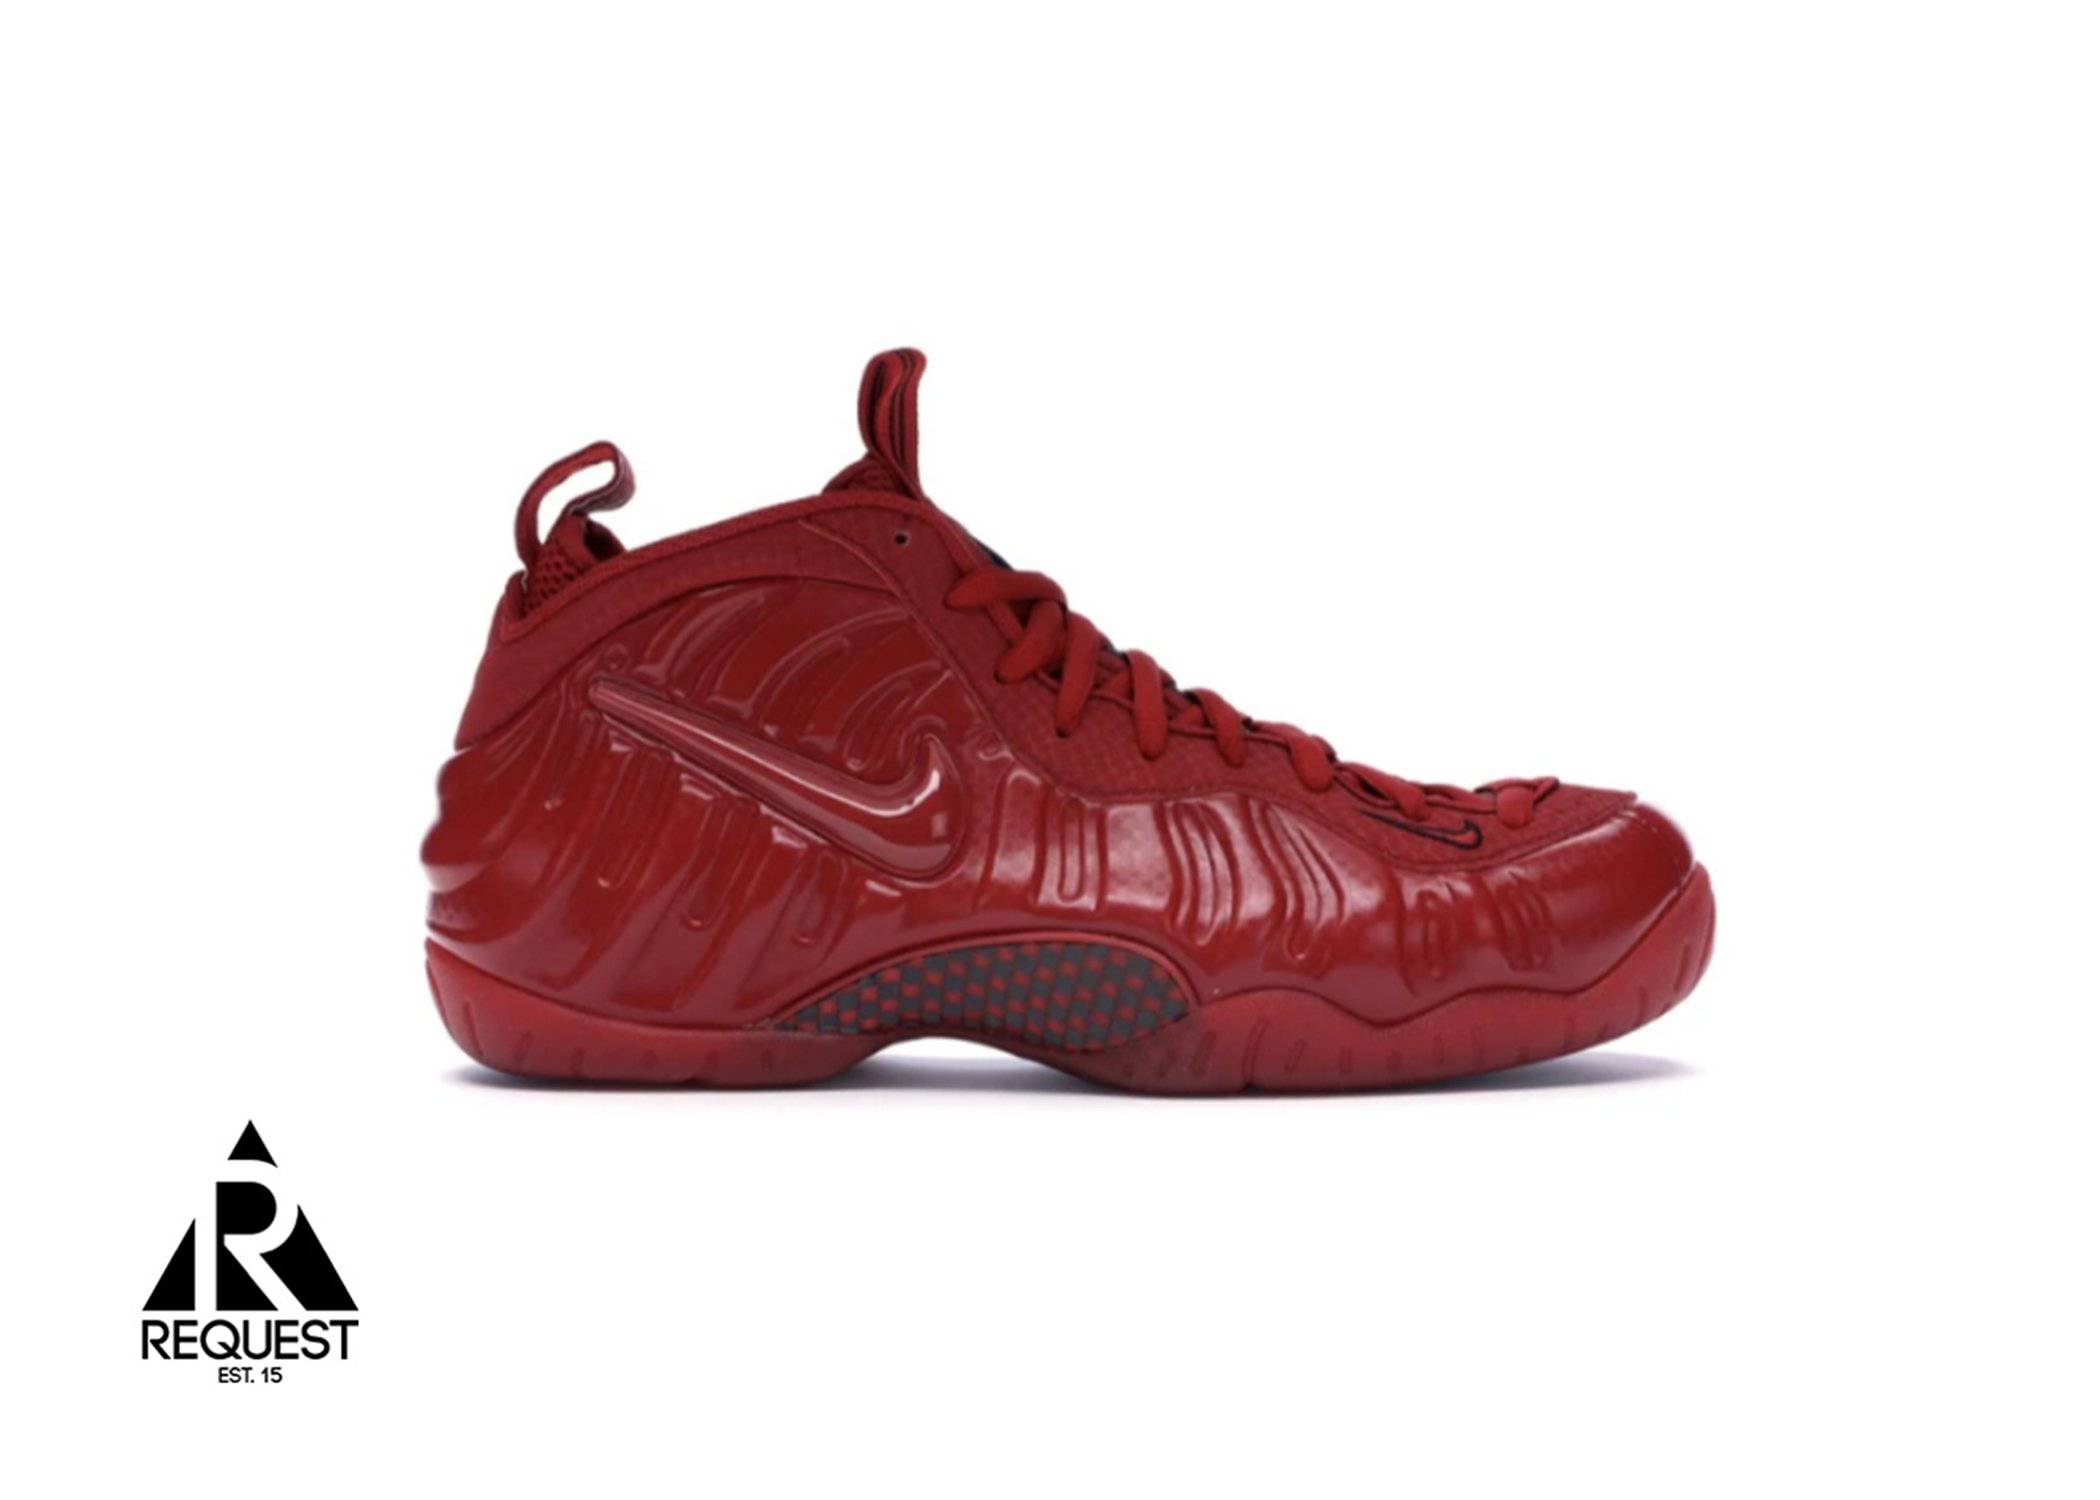 Nike Air Foamposite Pro “Red October “